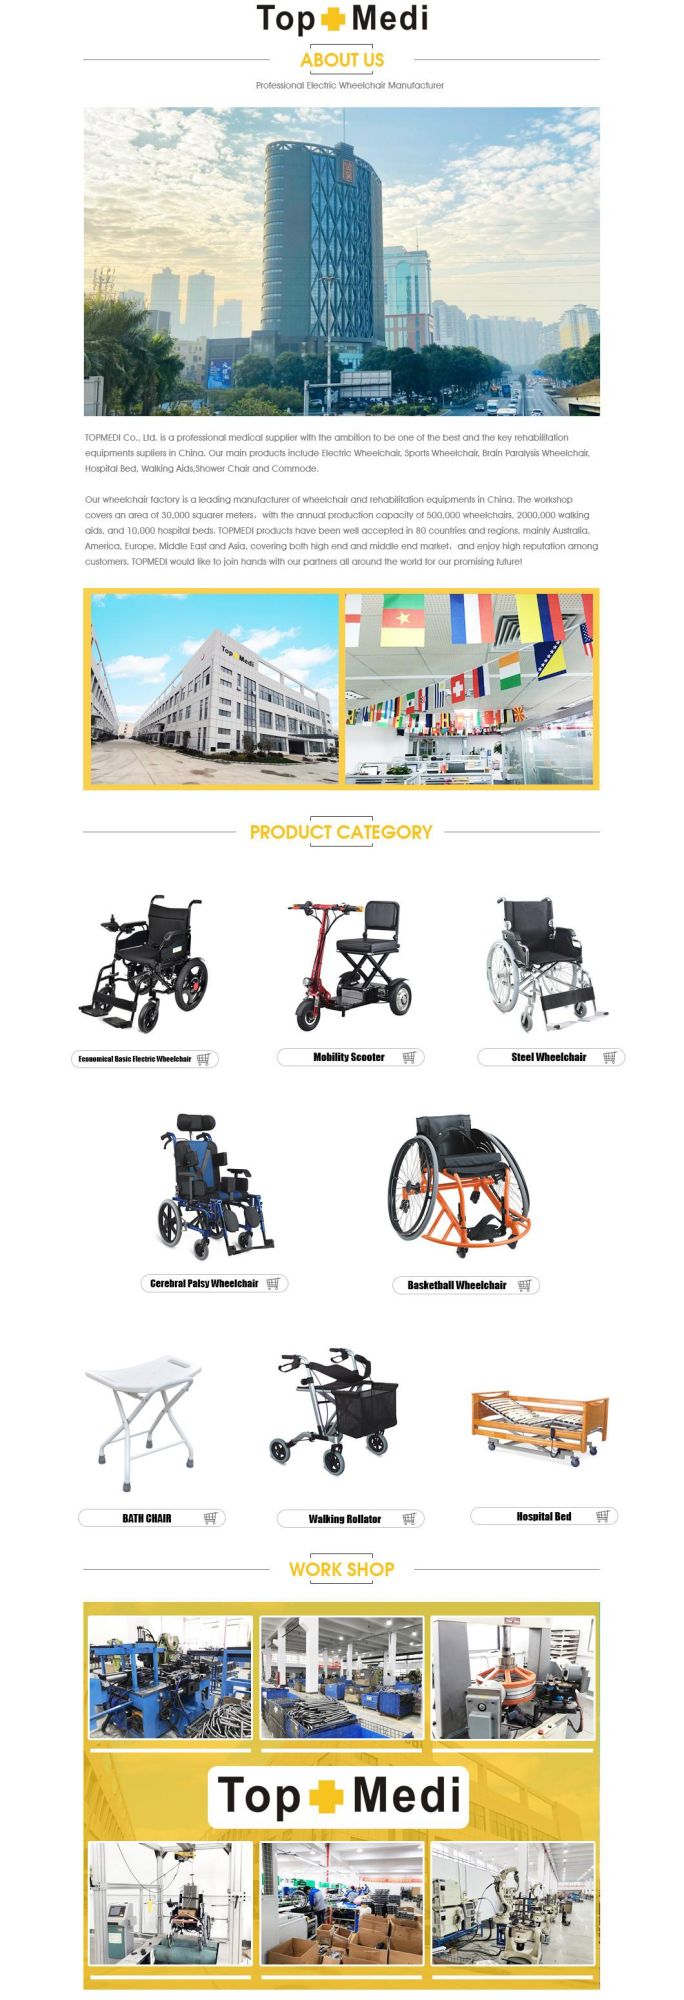 Lightweight Folding Aluminum Manual Wheelchair for Disabeld People